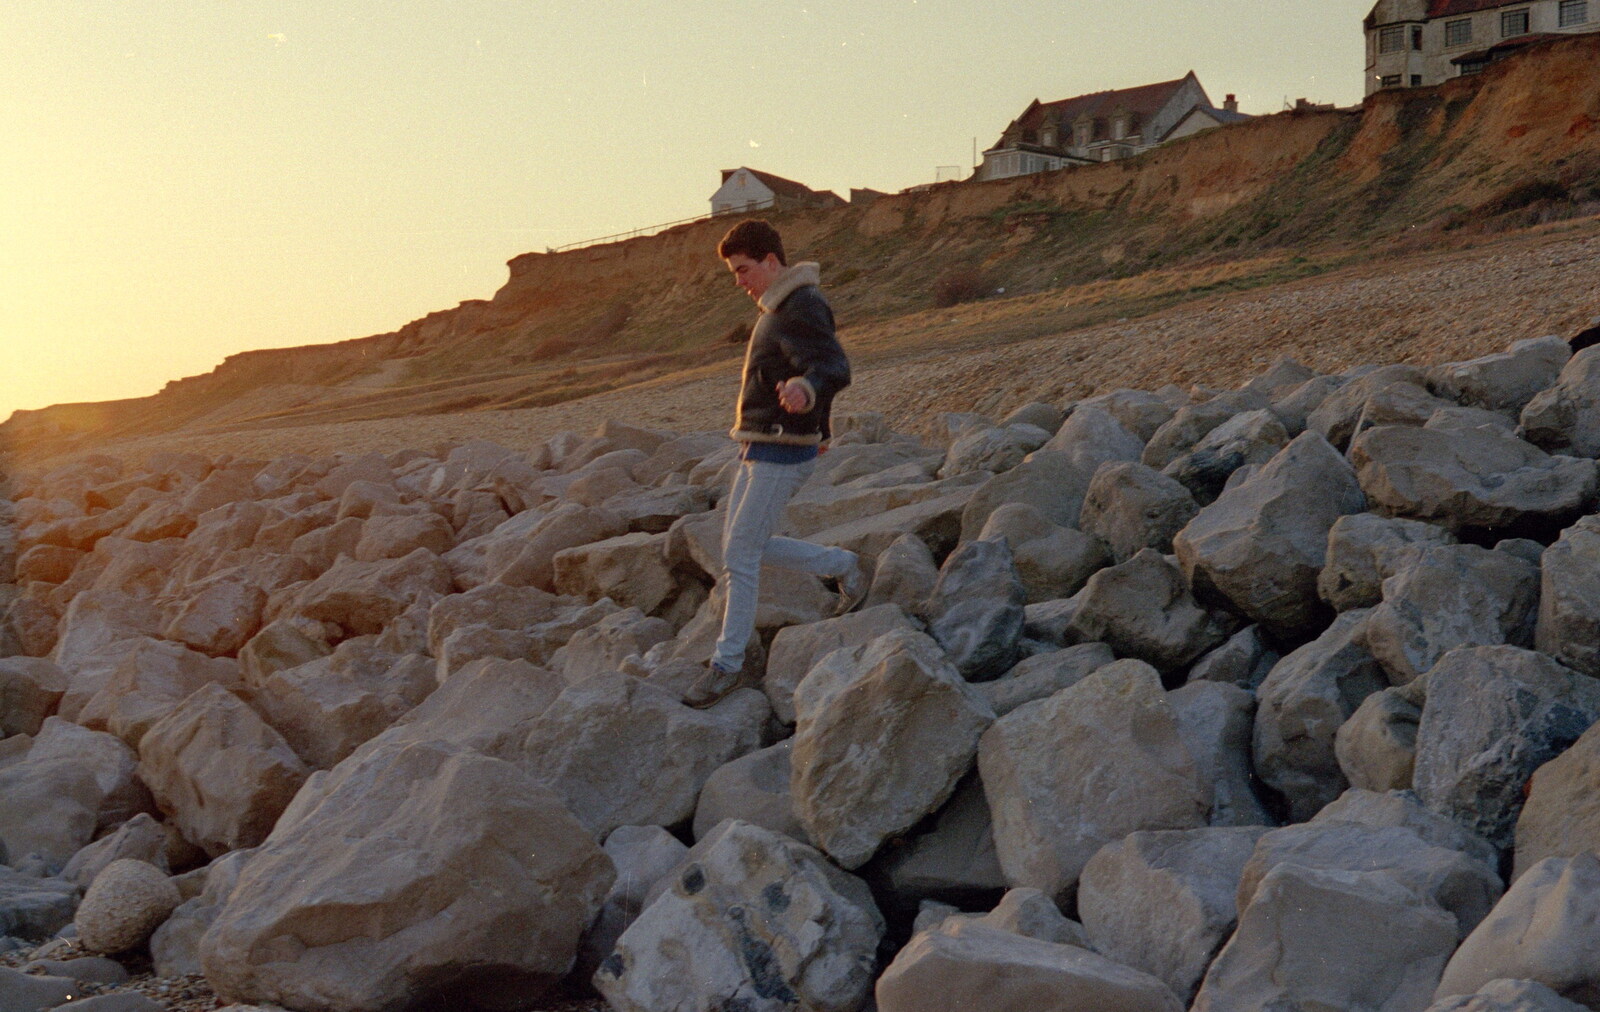 Jon the Hair climbs down the rocks from A CB Reunion and a Trip to the Beach, Barton on Sea, Hampshire - 4th April 1986